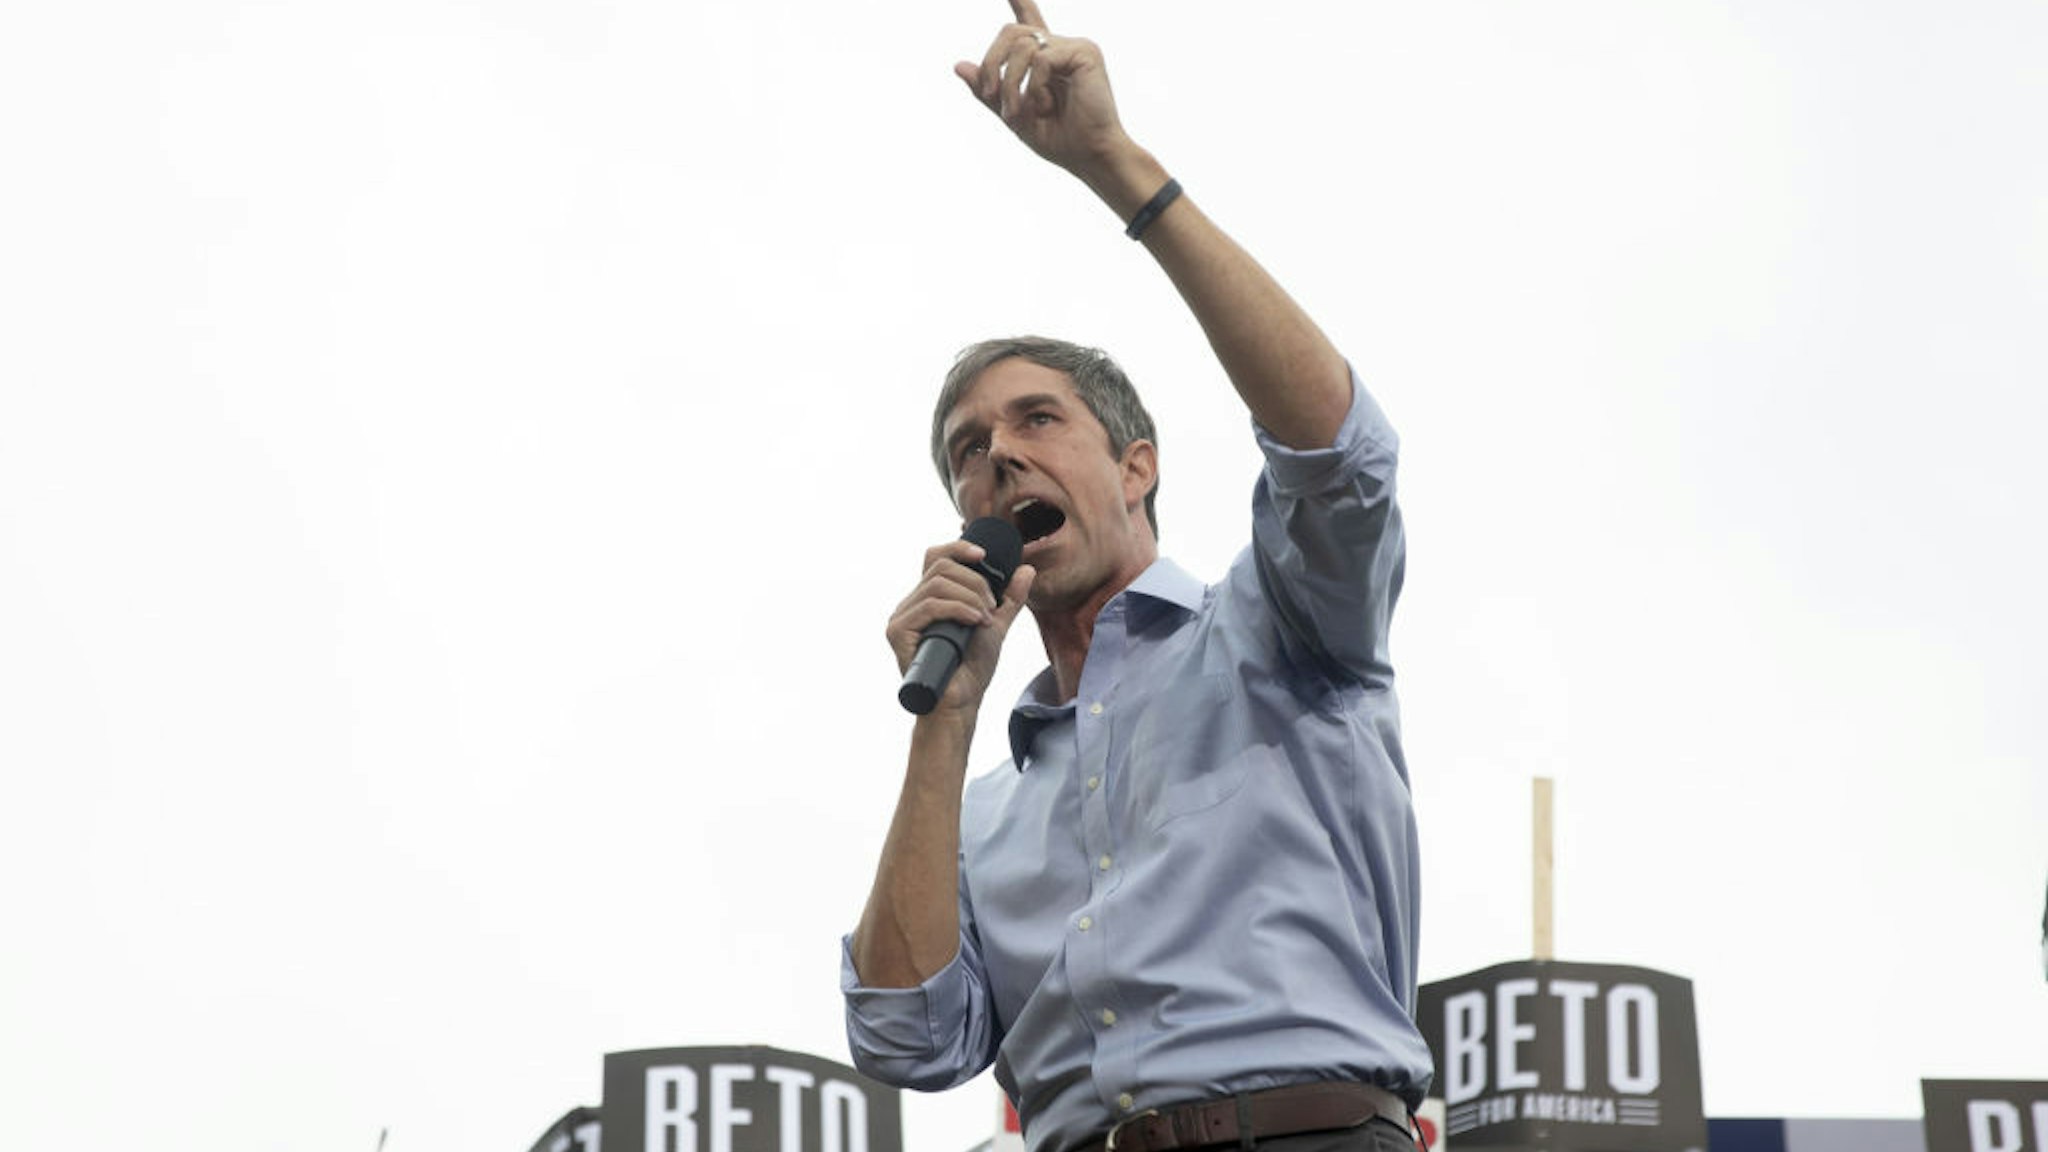 Beto O'Rourke, former Representative from Texas and 2020 Democratic presidential candidate, speaks at the Polk County Steak Fry in Des Moines, Iowa, U.S., on Saturday, Sept. 21, 2019.